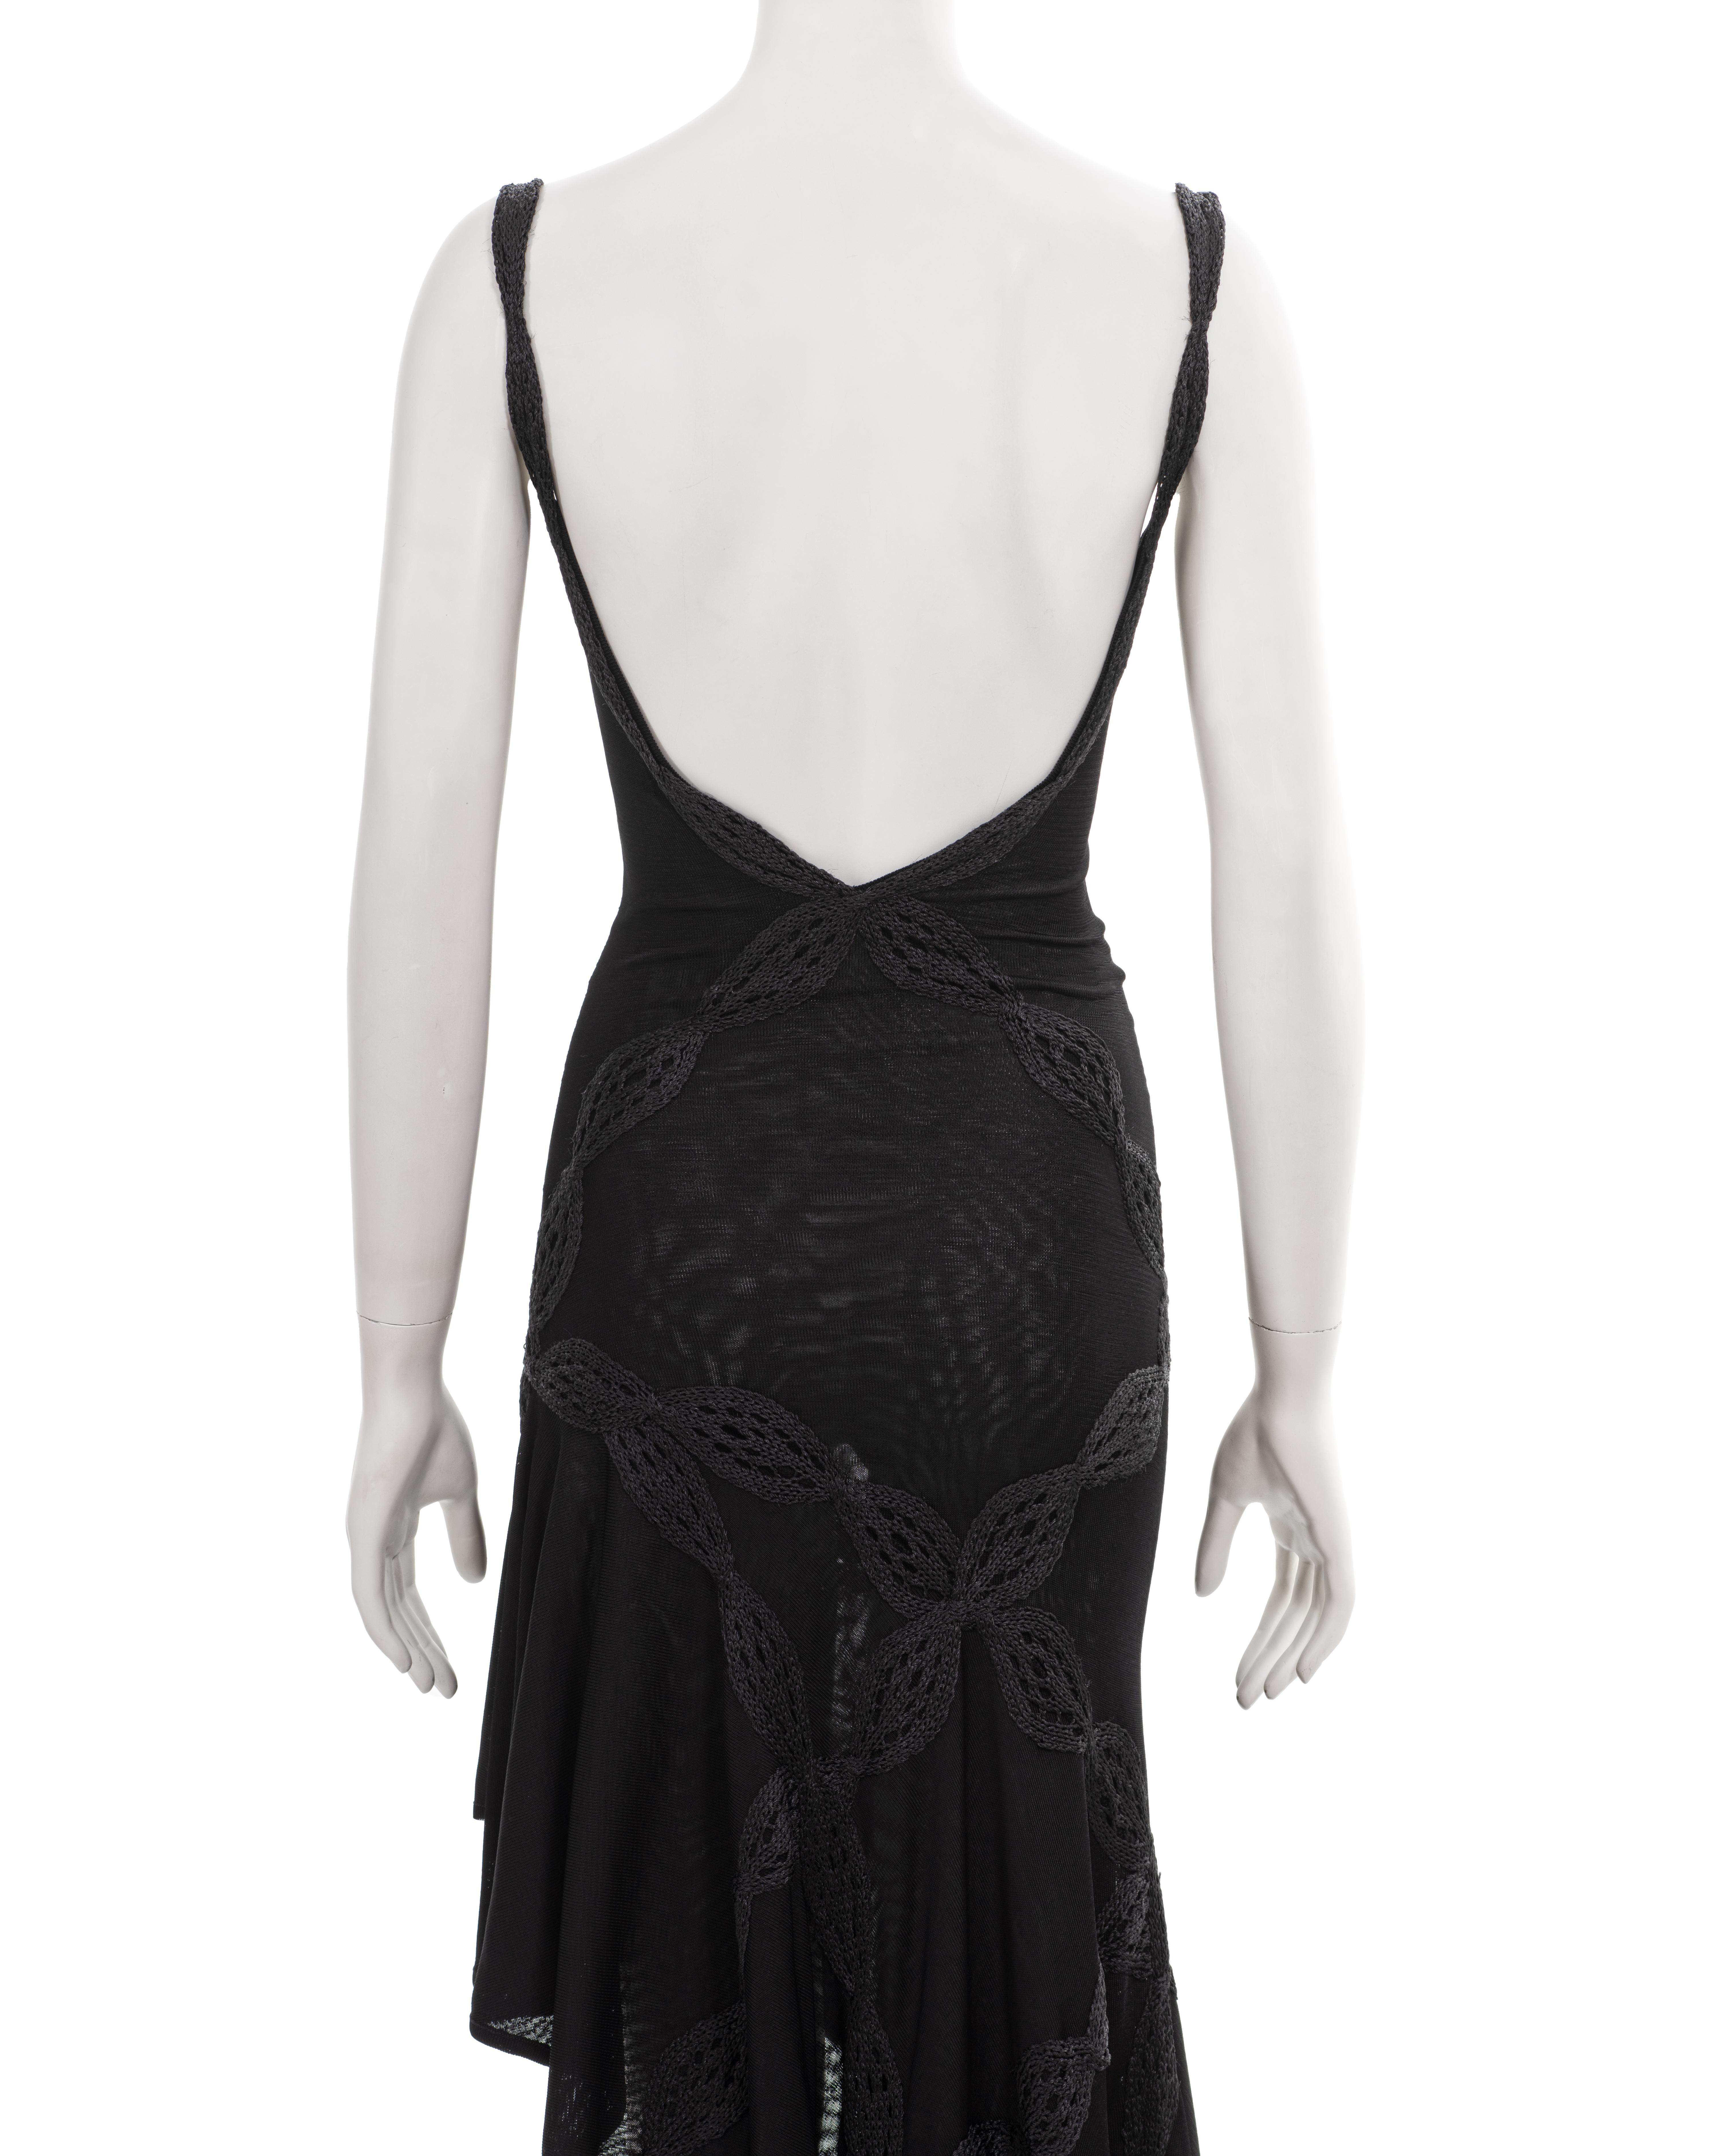 Christian Dior by John Galliano black embroidered knit evening dress, ss 2001 For Sale 4